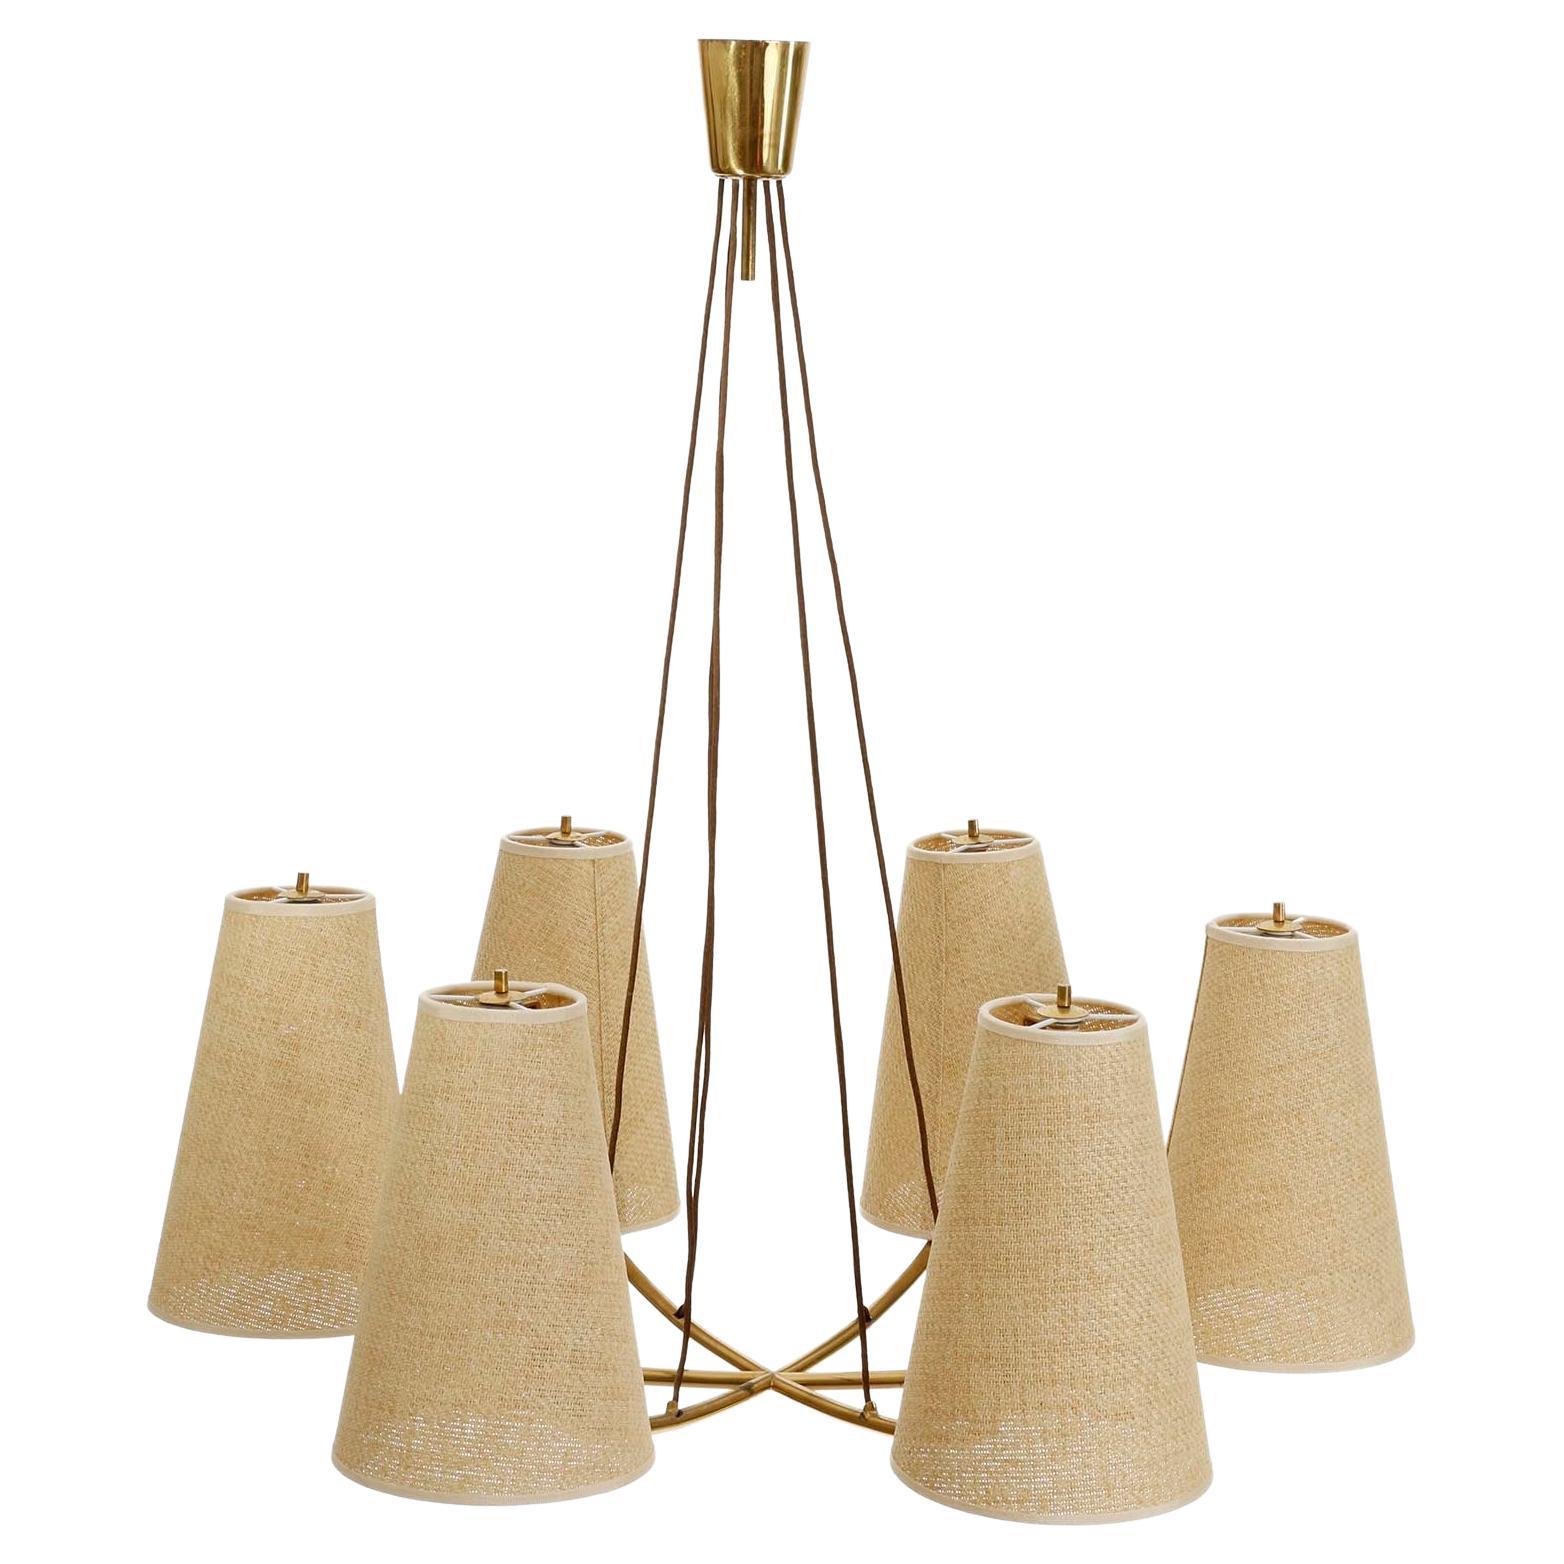 A large pendant lamp model no. 3635/6 'Mexiko' (engl. Mexico) by J.T. Kalmar, Austria, 1960s.
A brass star with six arms and cone shaped wicker or cane shades. Each chandelier has six sockets for medium or standard screw base bulbs.
The height of